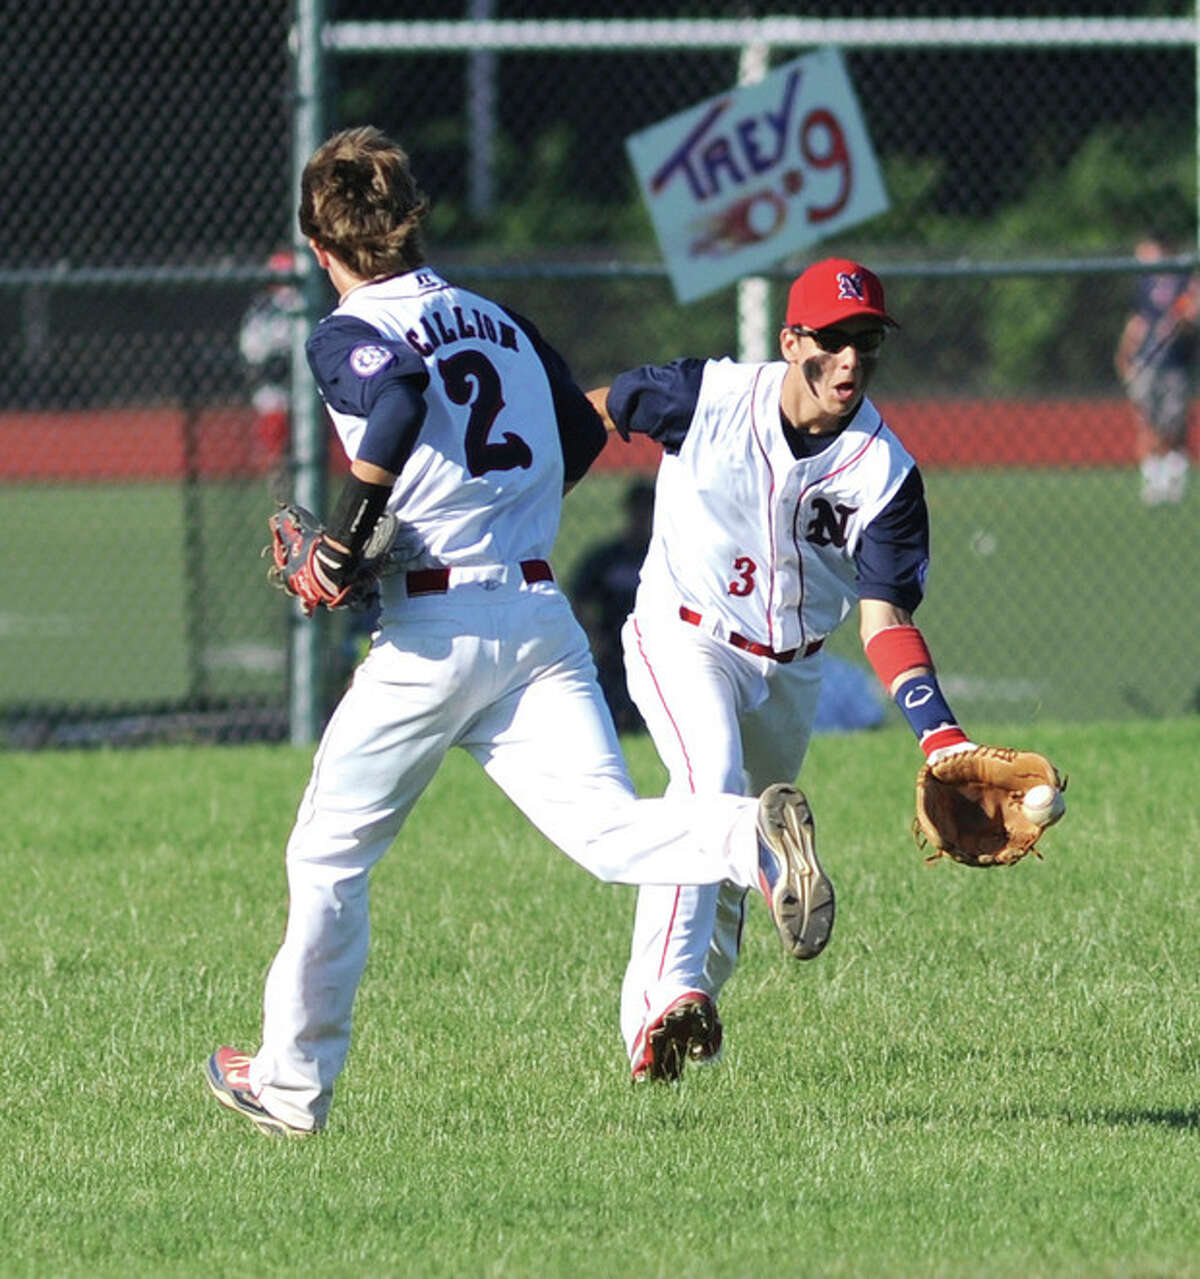 Hour Photo/John Nash Norwalk center fielder Ed Petrillo, right, collects the ball on a bounce after a Texas League single fell in between him and shortstop Alex Scallion during Tuesday?•s Babe Ruth game at Brien McMahon.